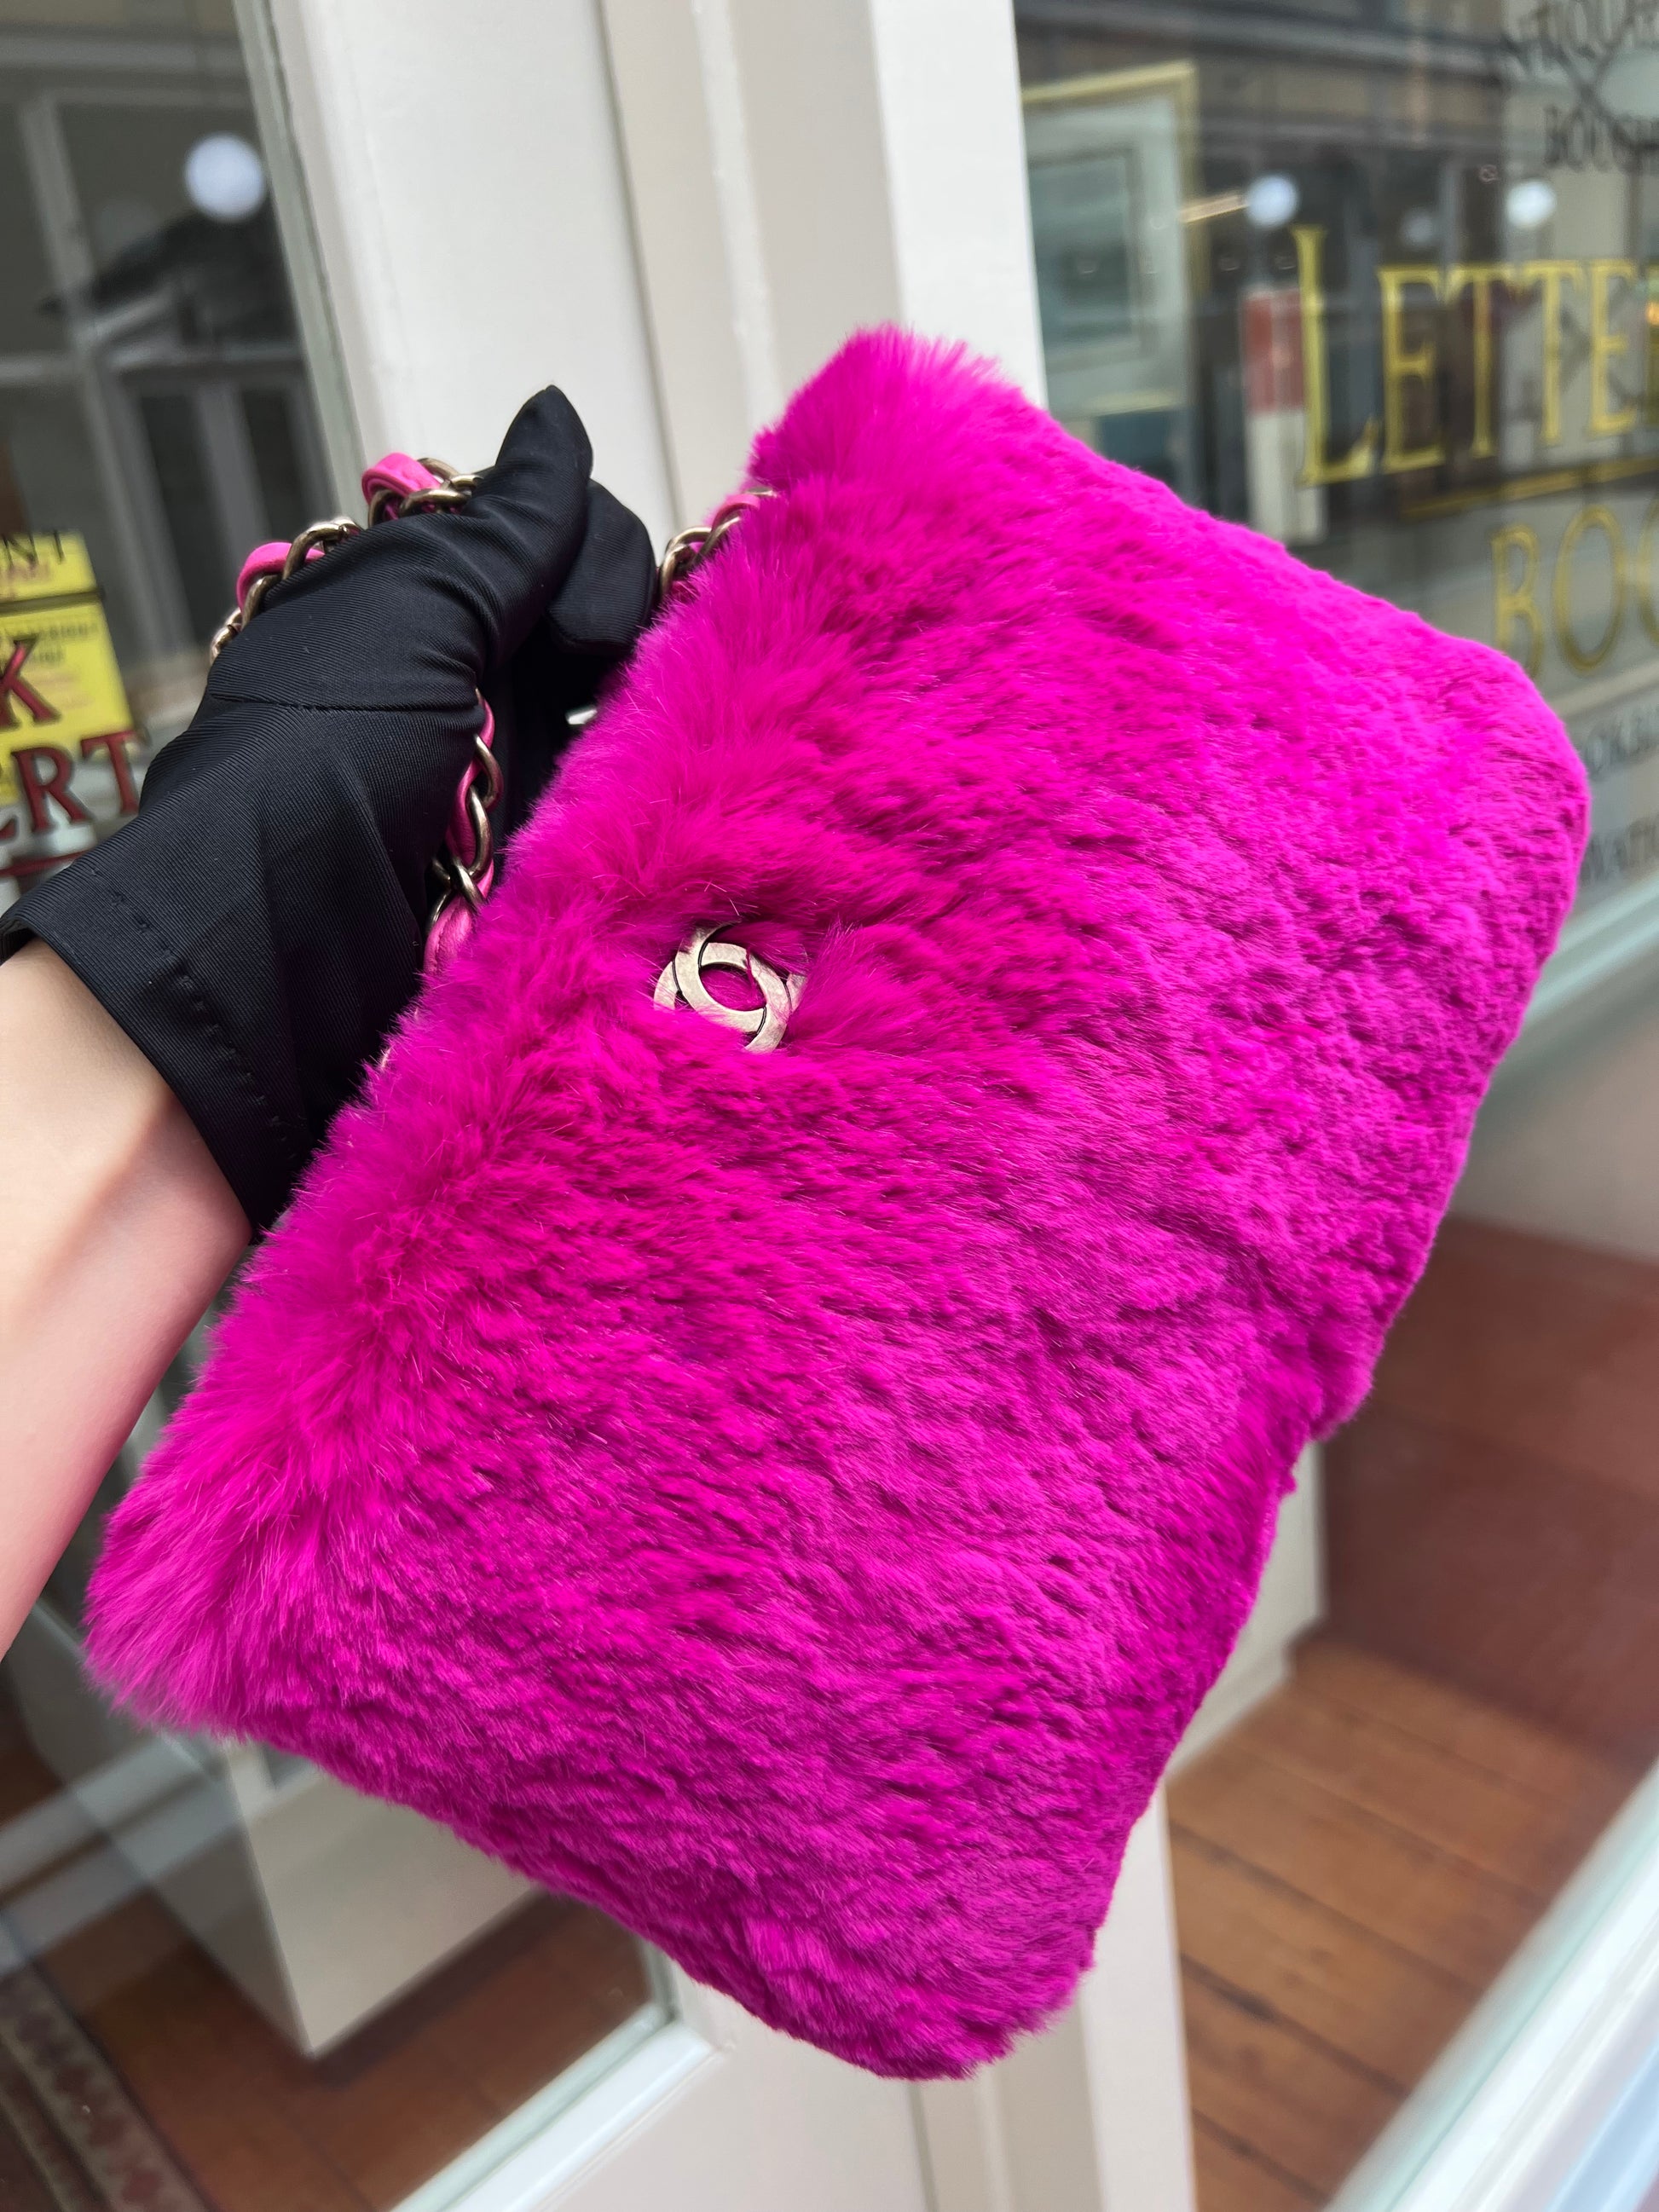 Sotheby's Specialists Picks: Pink Chanel Bag